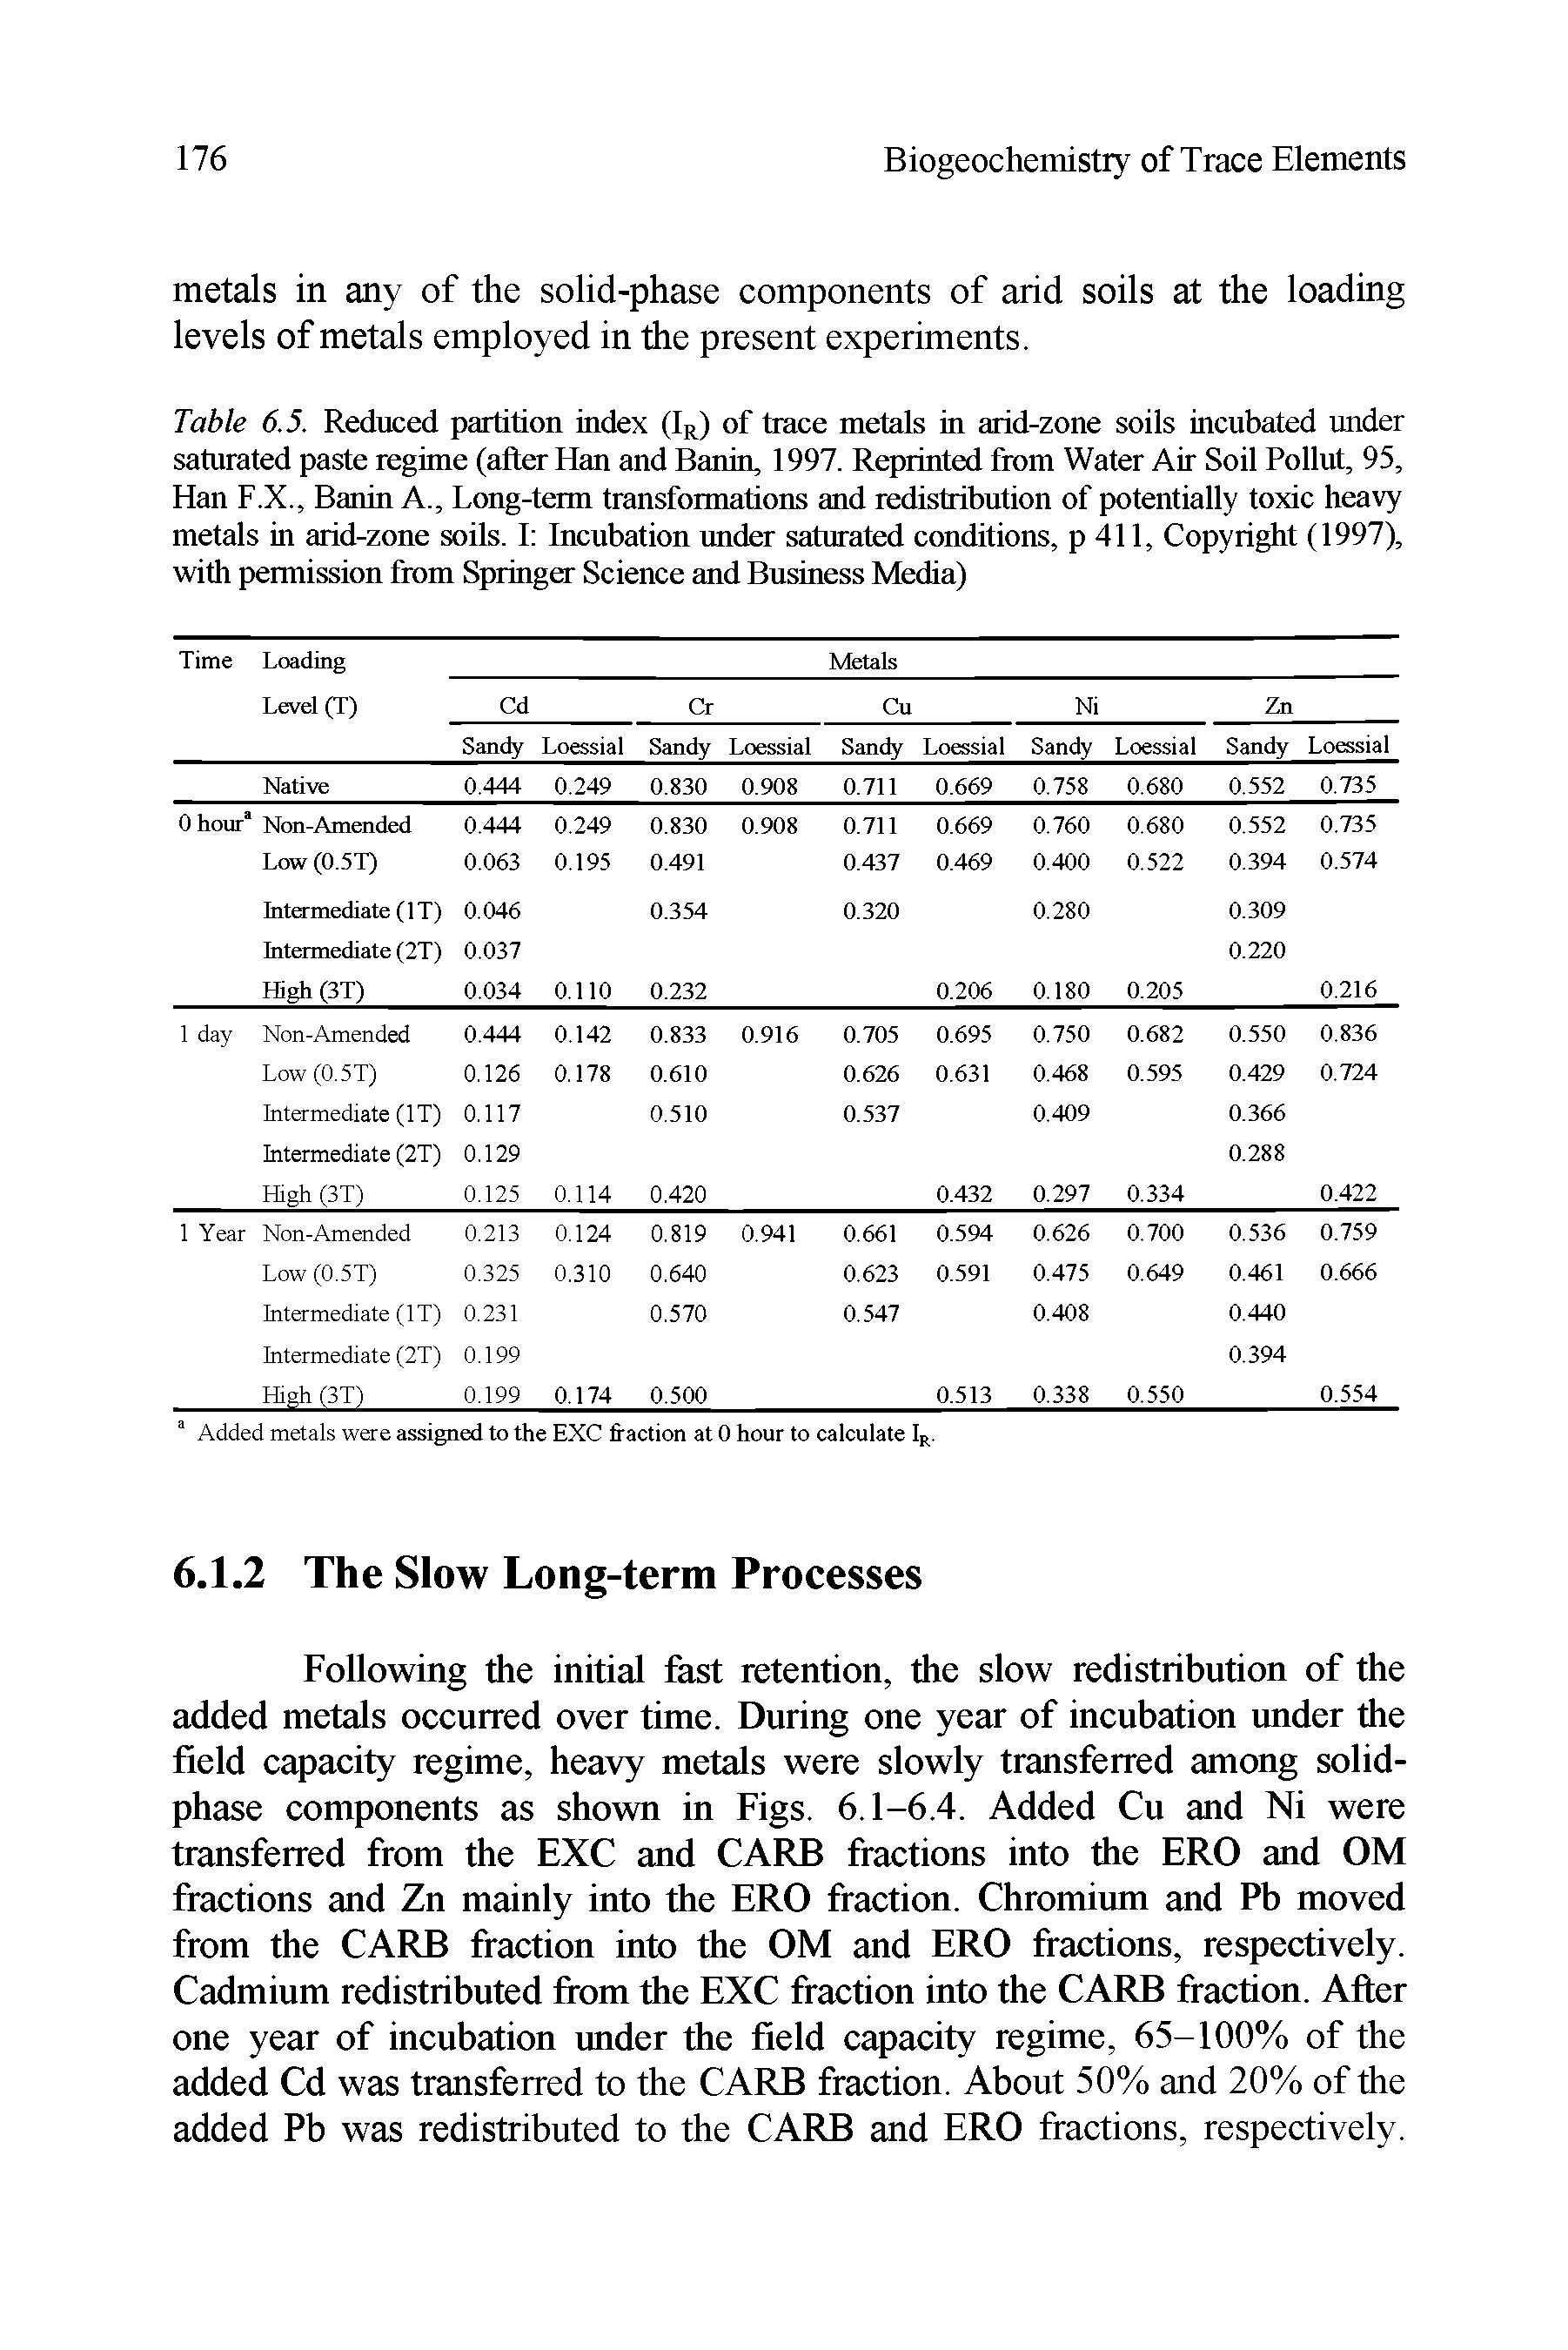 Table 6.5. Reduced partition index (IR) of trace metals in arid-zone soils incubated under saturated paste regime (after Han and Banin, 1997. Reprinted from Water Air Soil Pollut, 95, Han F.X., Banin A., Long-term transformations and redistribution of potentially toxic heavy metals in arid-zone soils. I Incubation under saturated conditions, p 411, Copyright (1997), with permission from Springer Science and Business Media)...